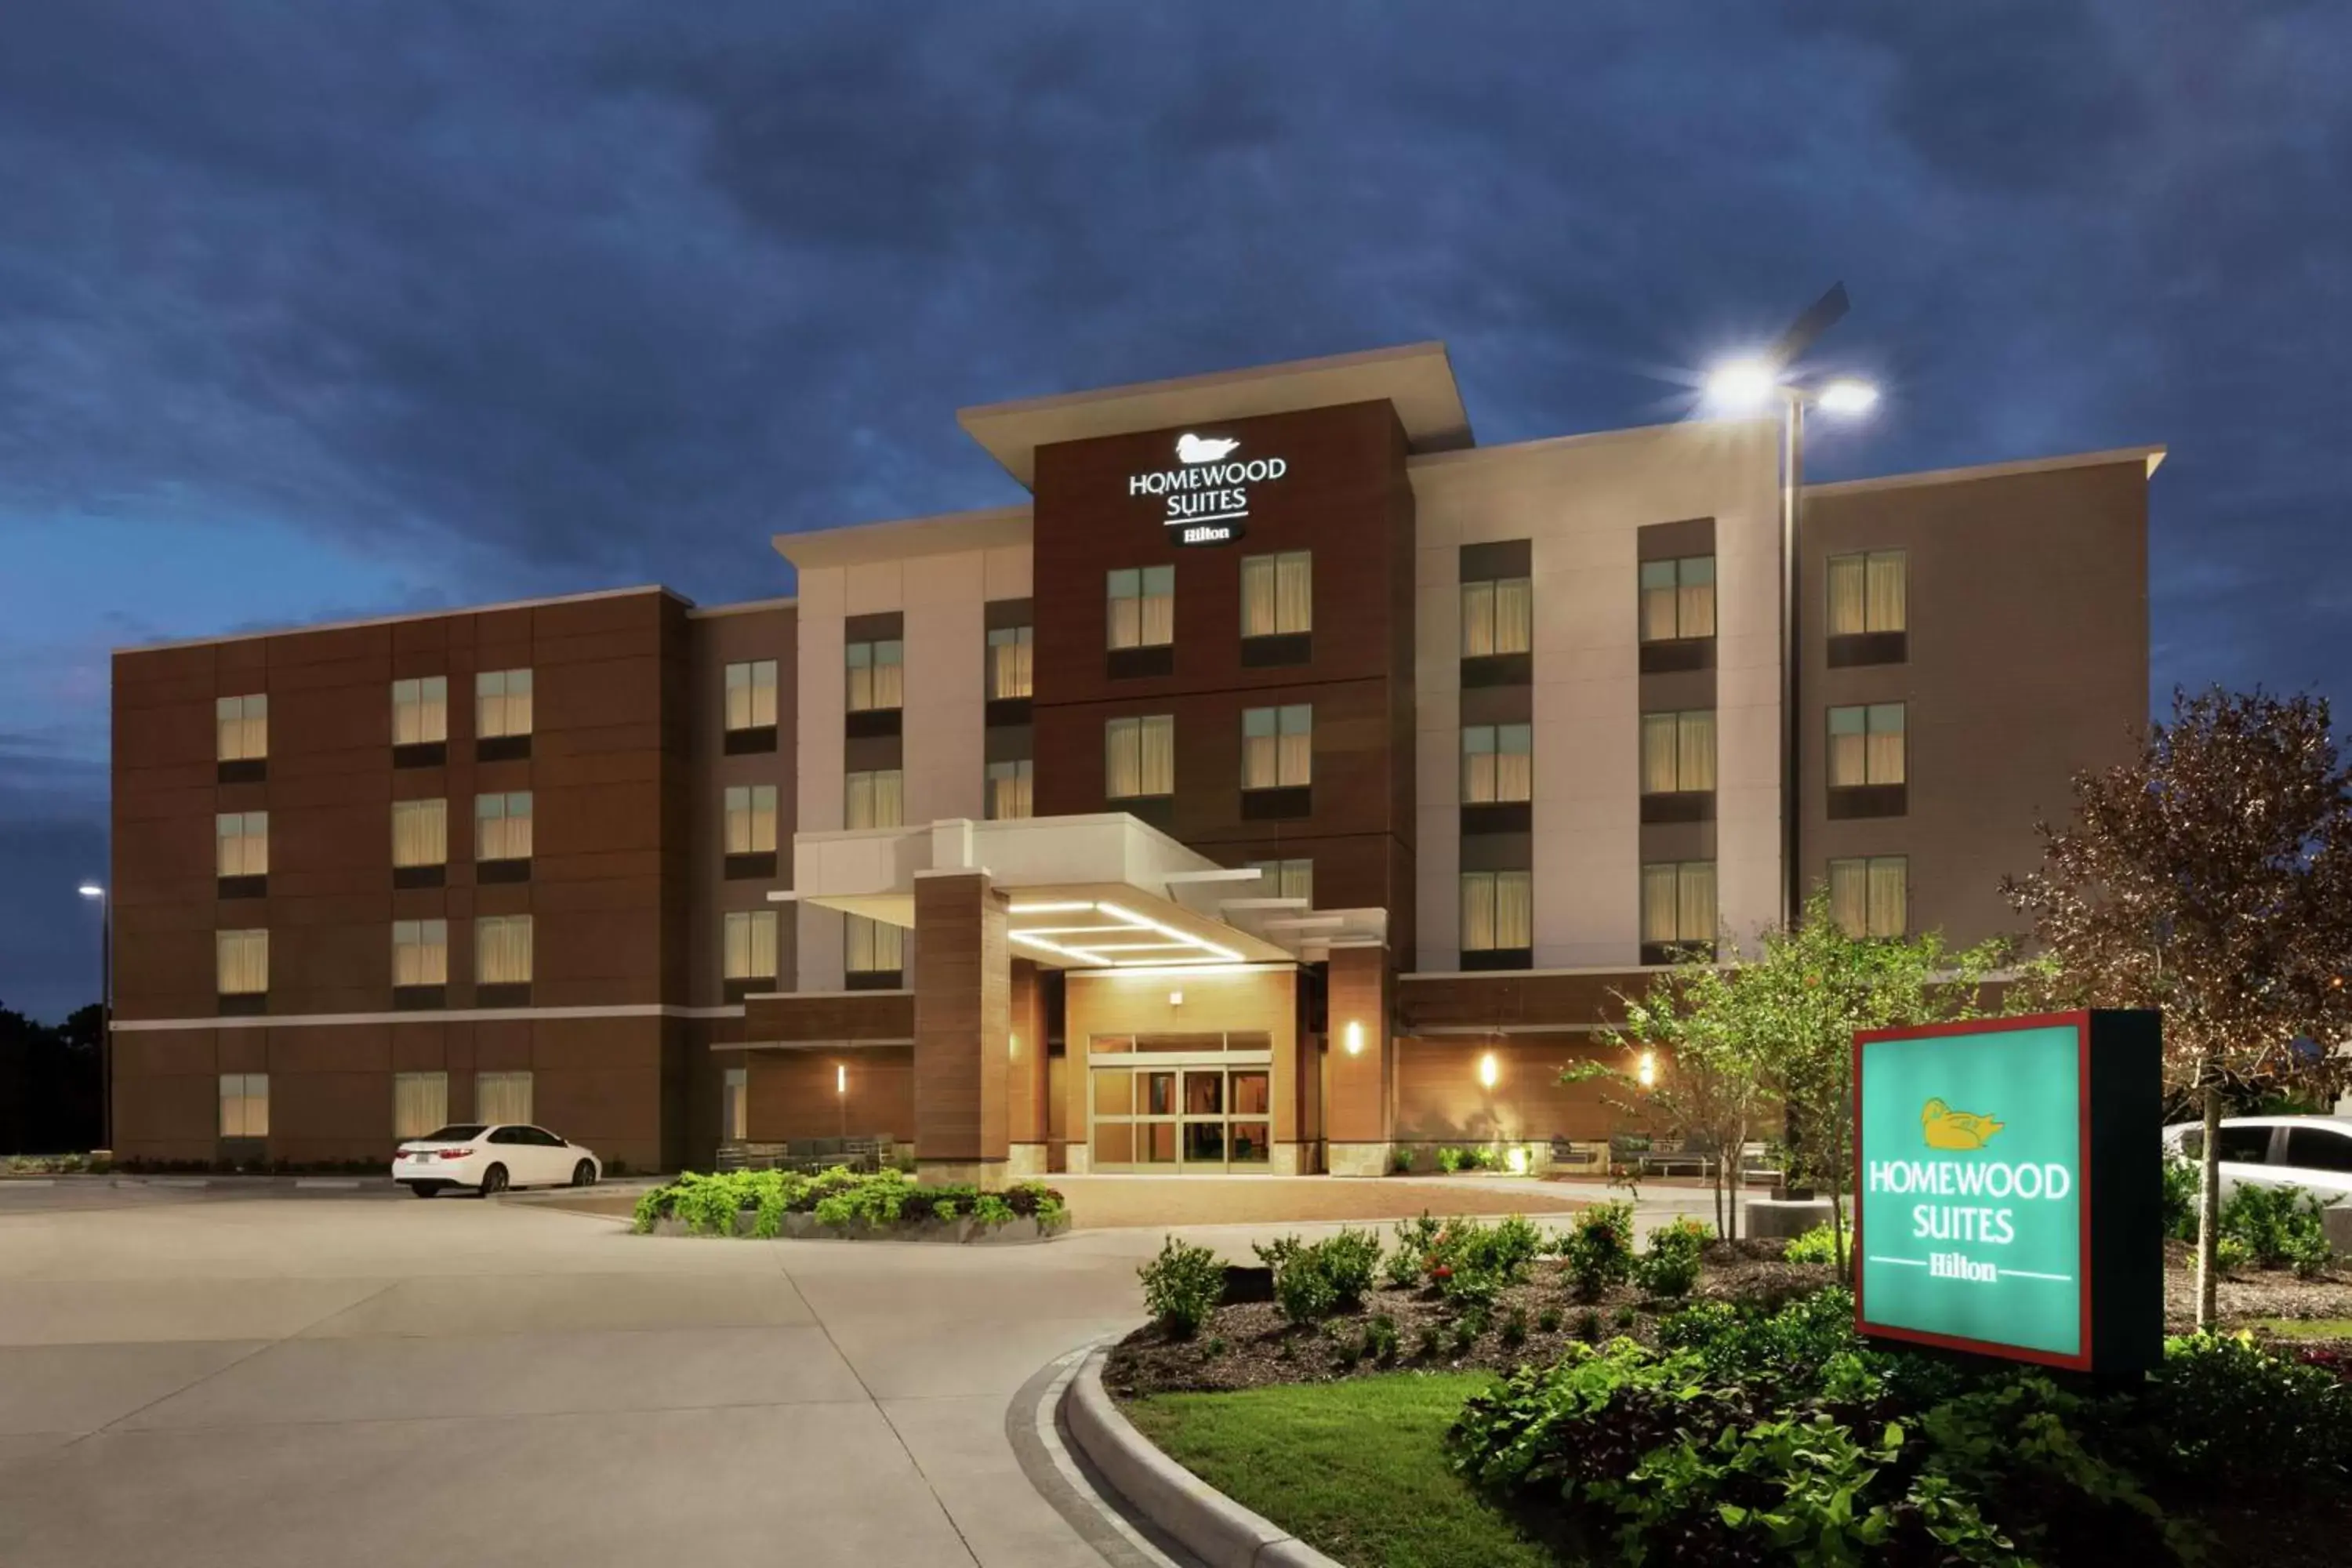 Property Building in Homewood Suites by Hilton Houston NW at Beltway 8